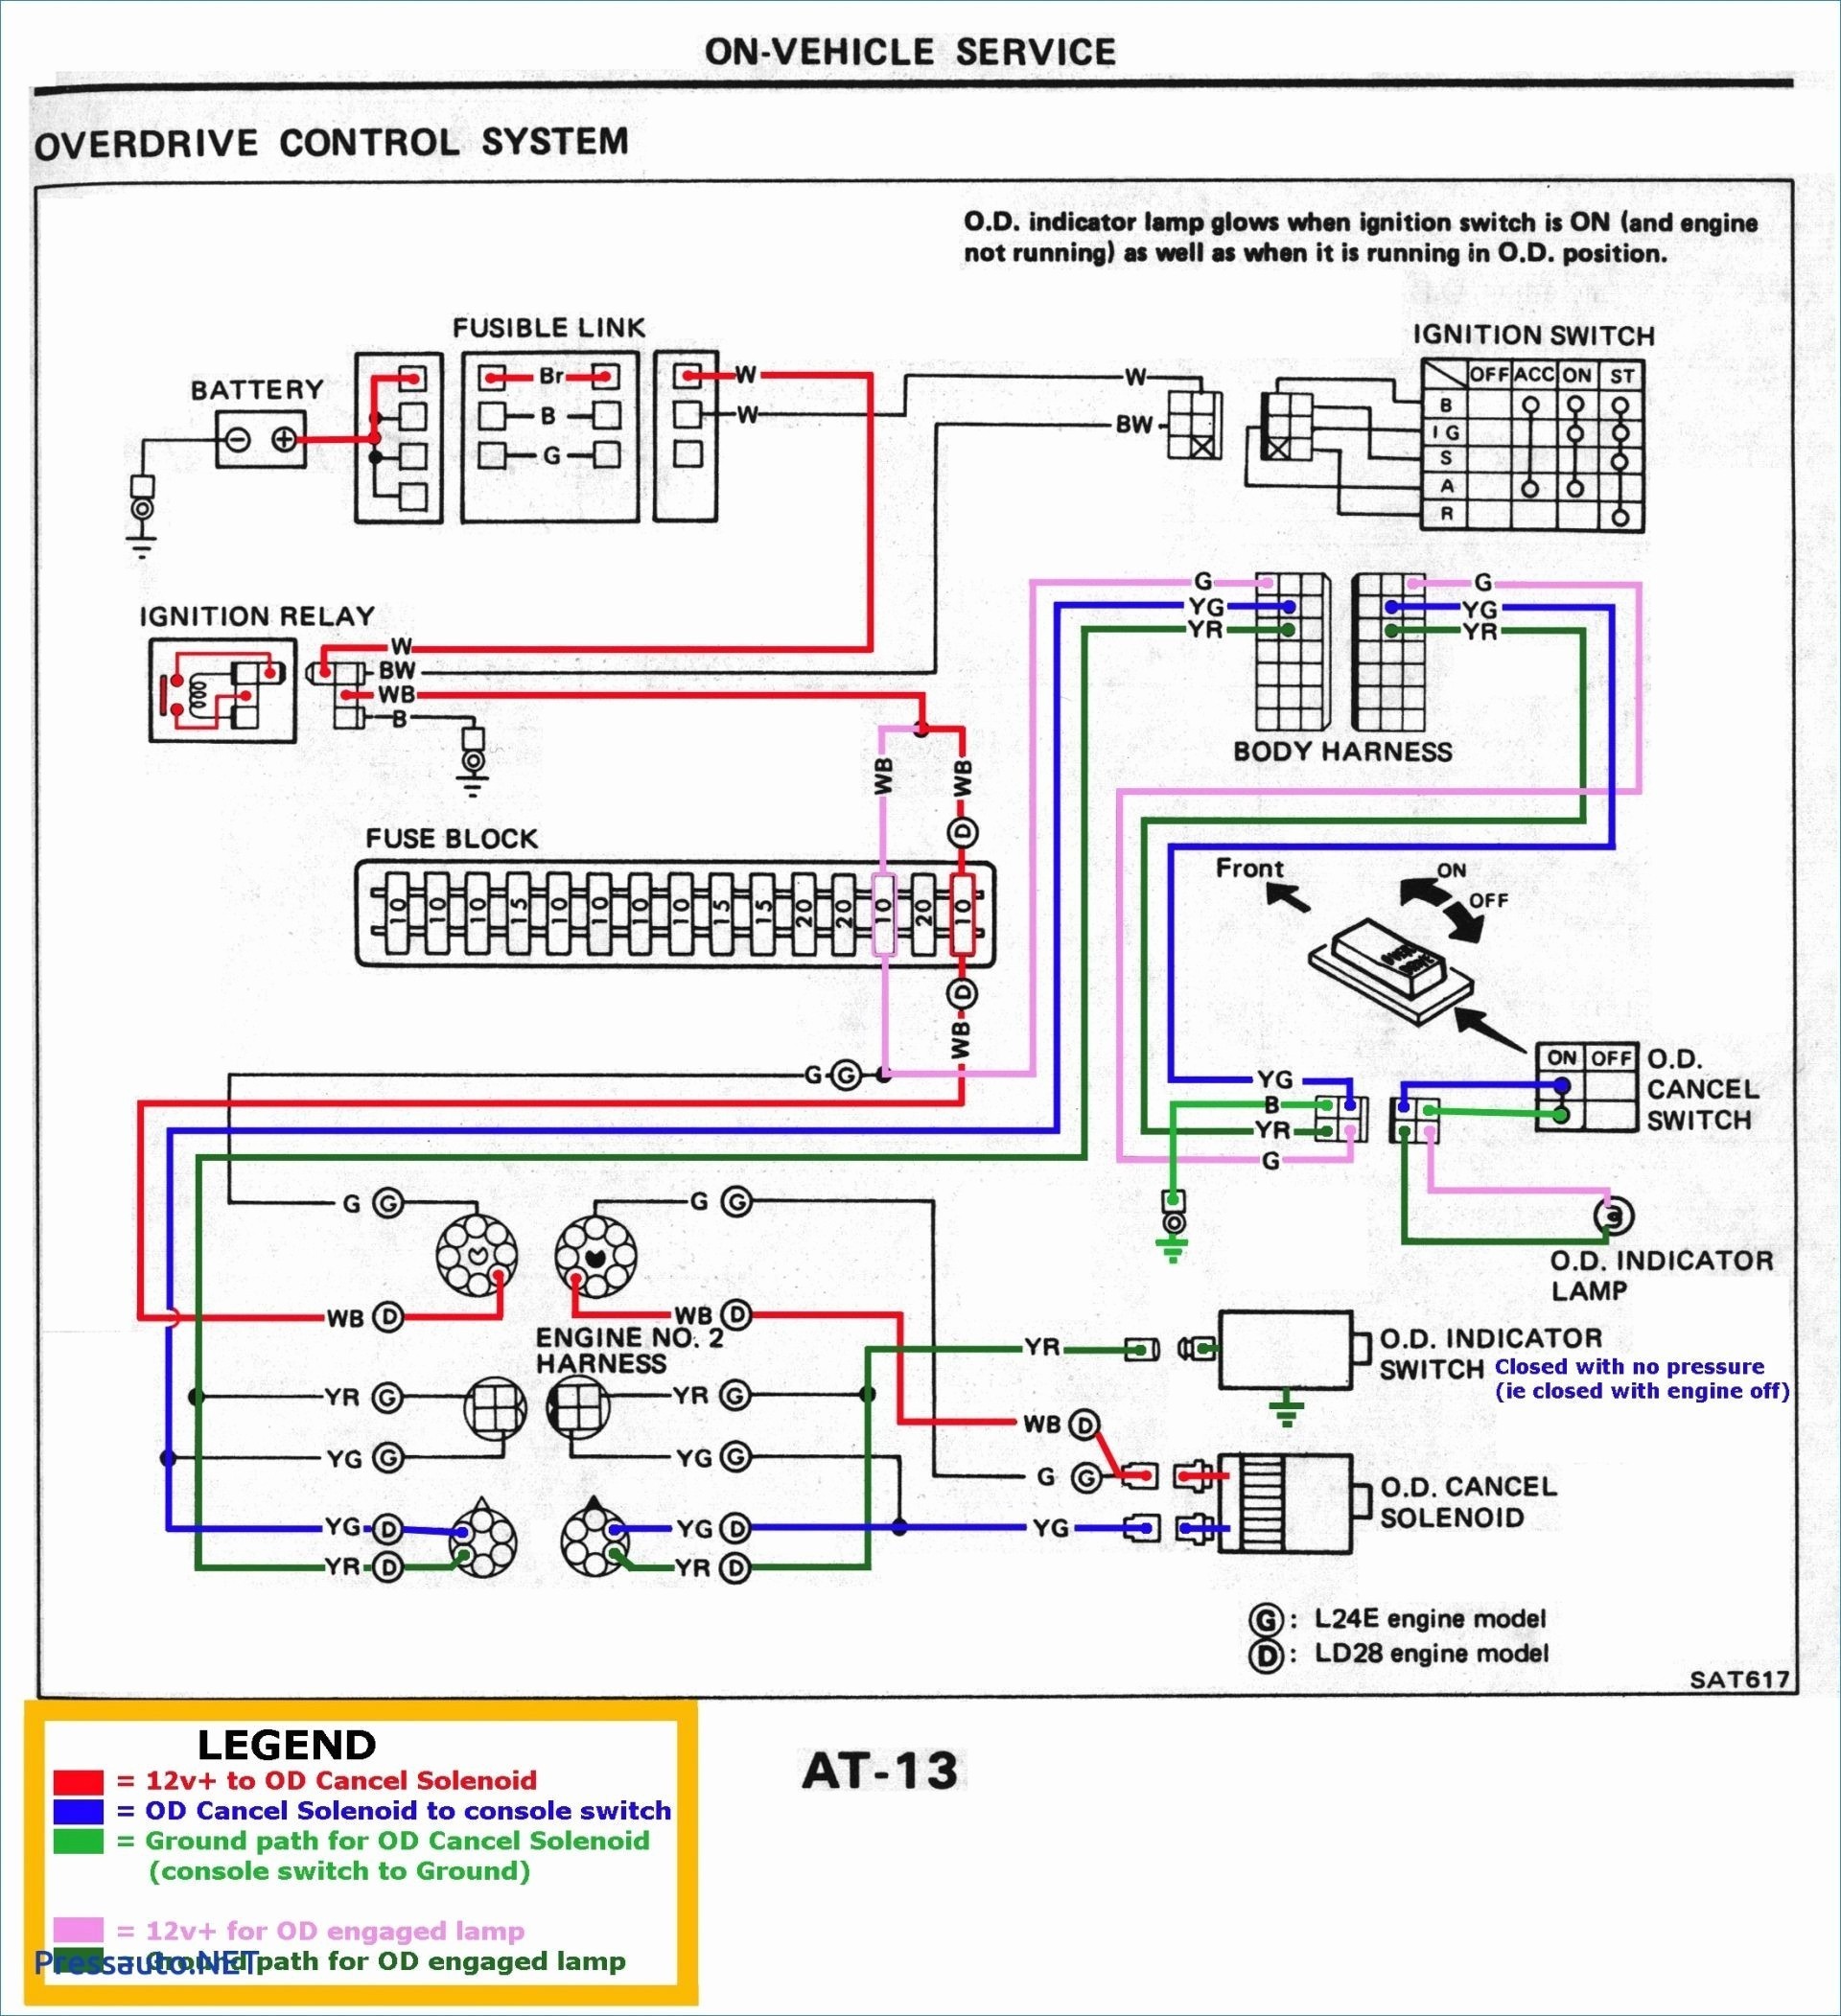 Wiring Diagram for Johnson Outboard Ignition Switch New Alternator Wiring Diagram Tachometer Best Wiring Diagram Chevy